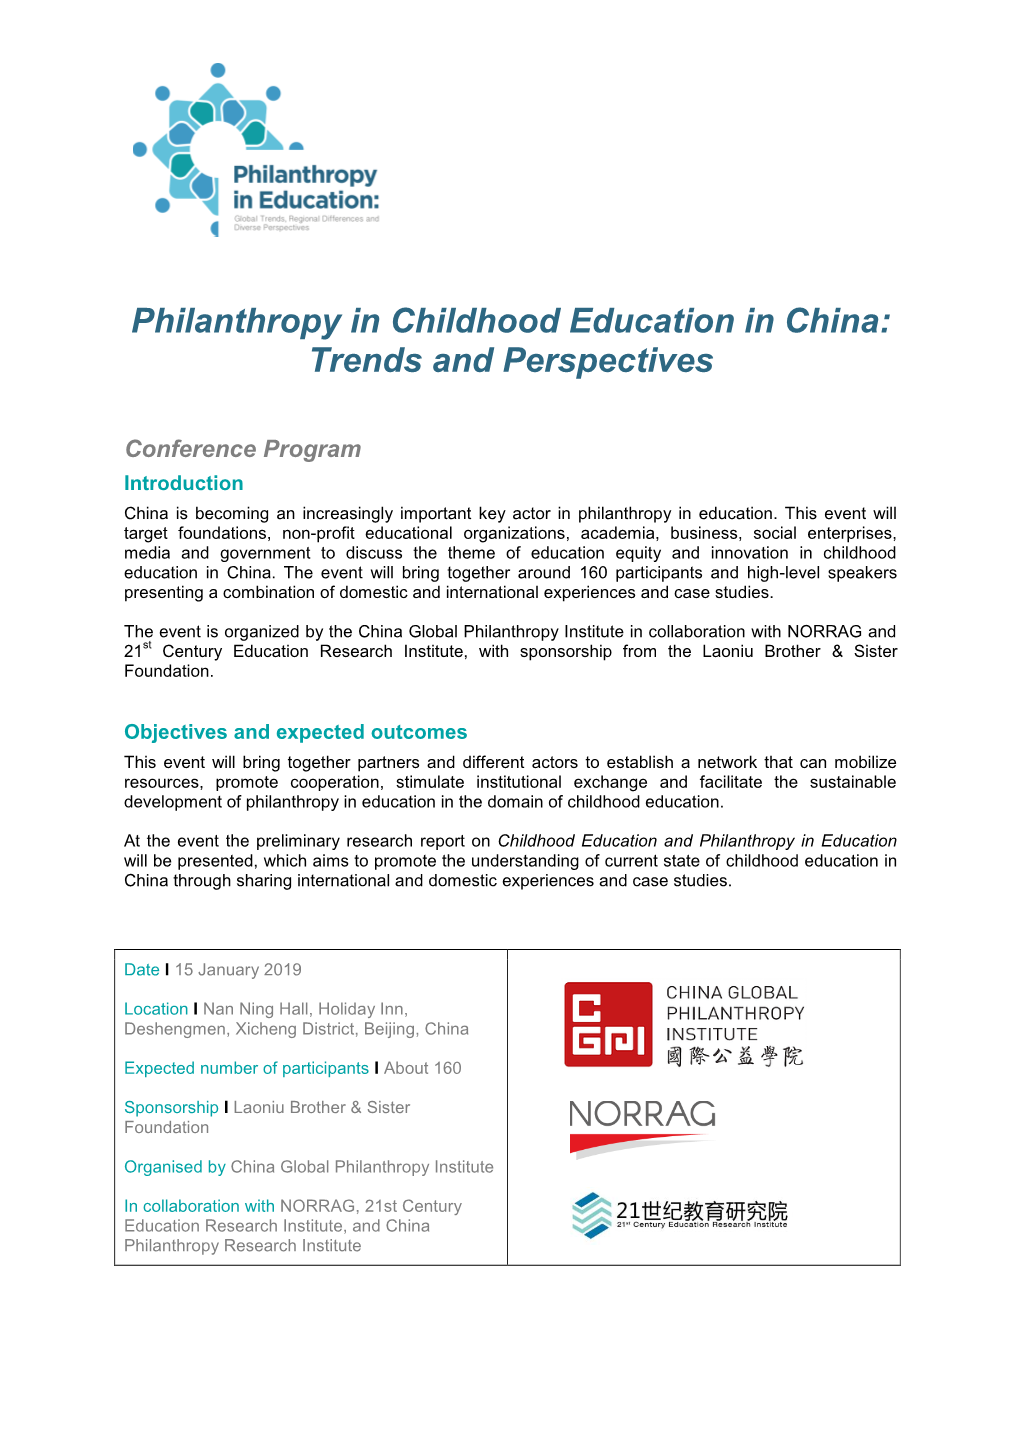 Philanthropy in Childhood Education in China: Trends and Perspectives